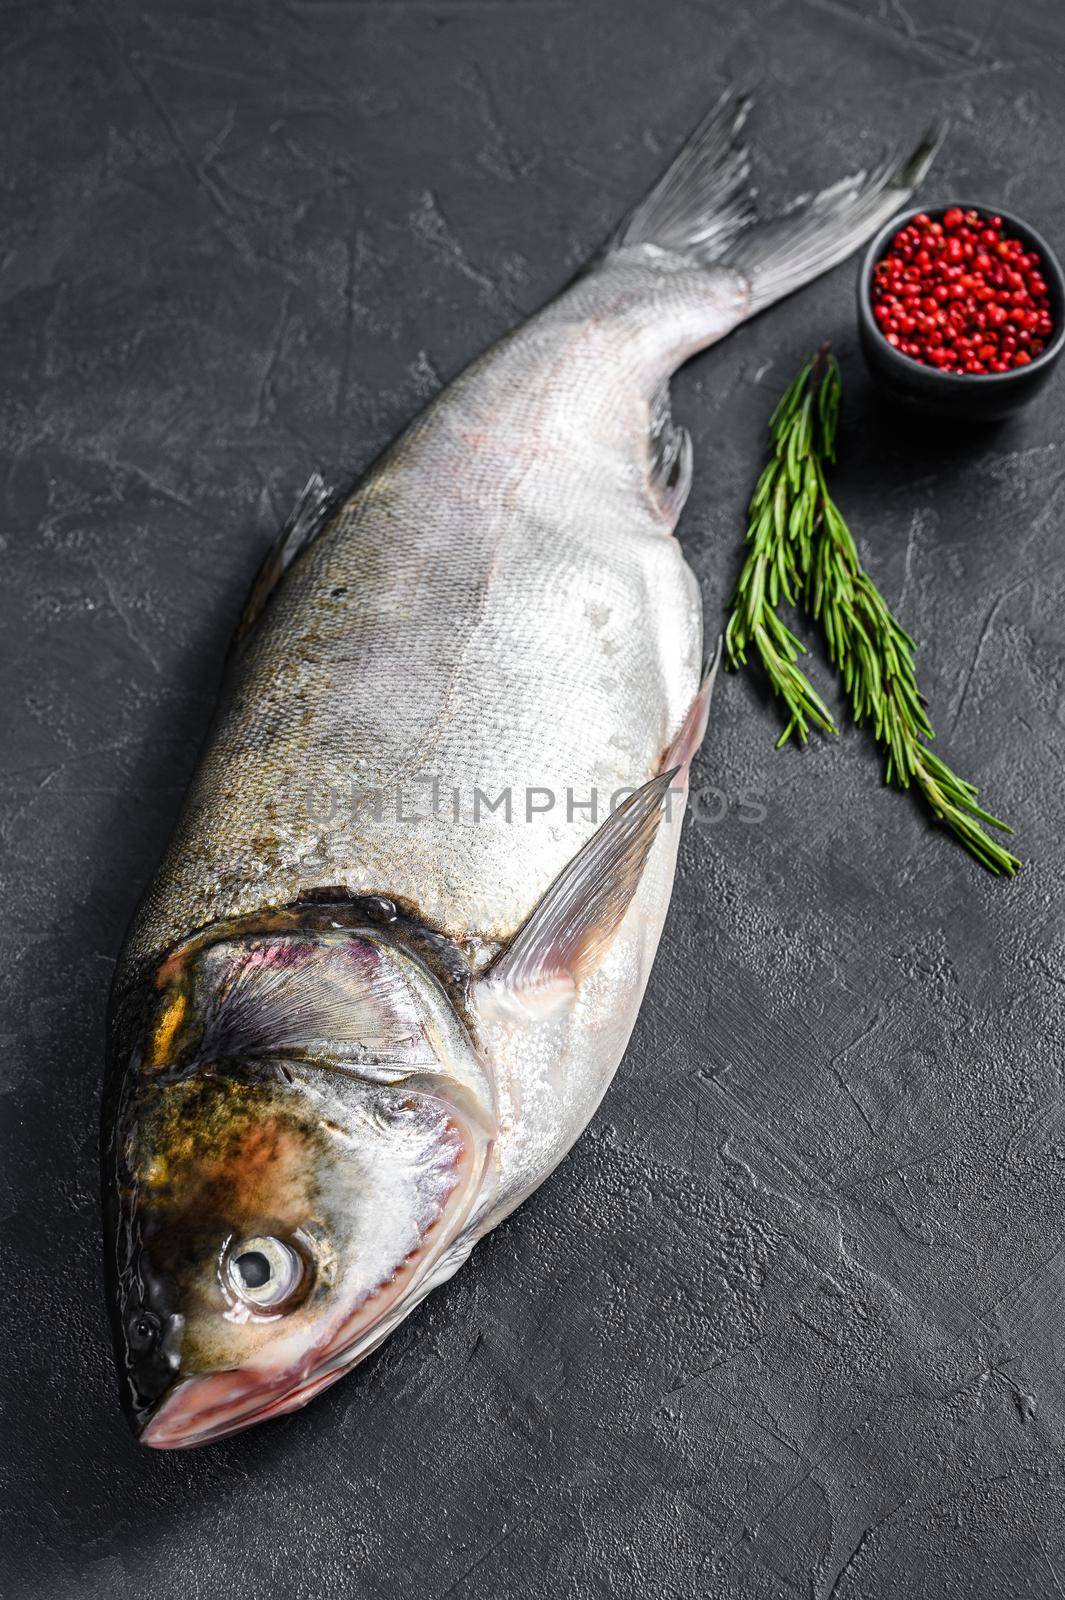 Raw whole fish silver carp. Black background. Top view.